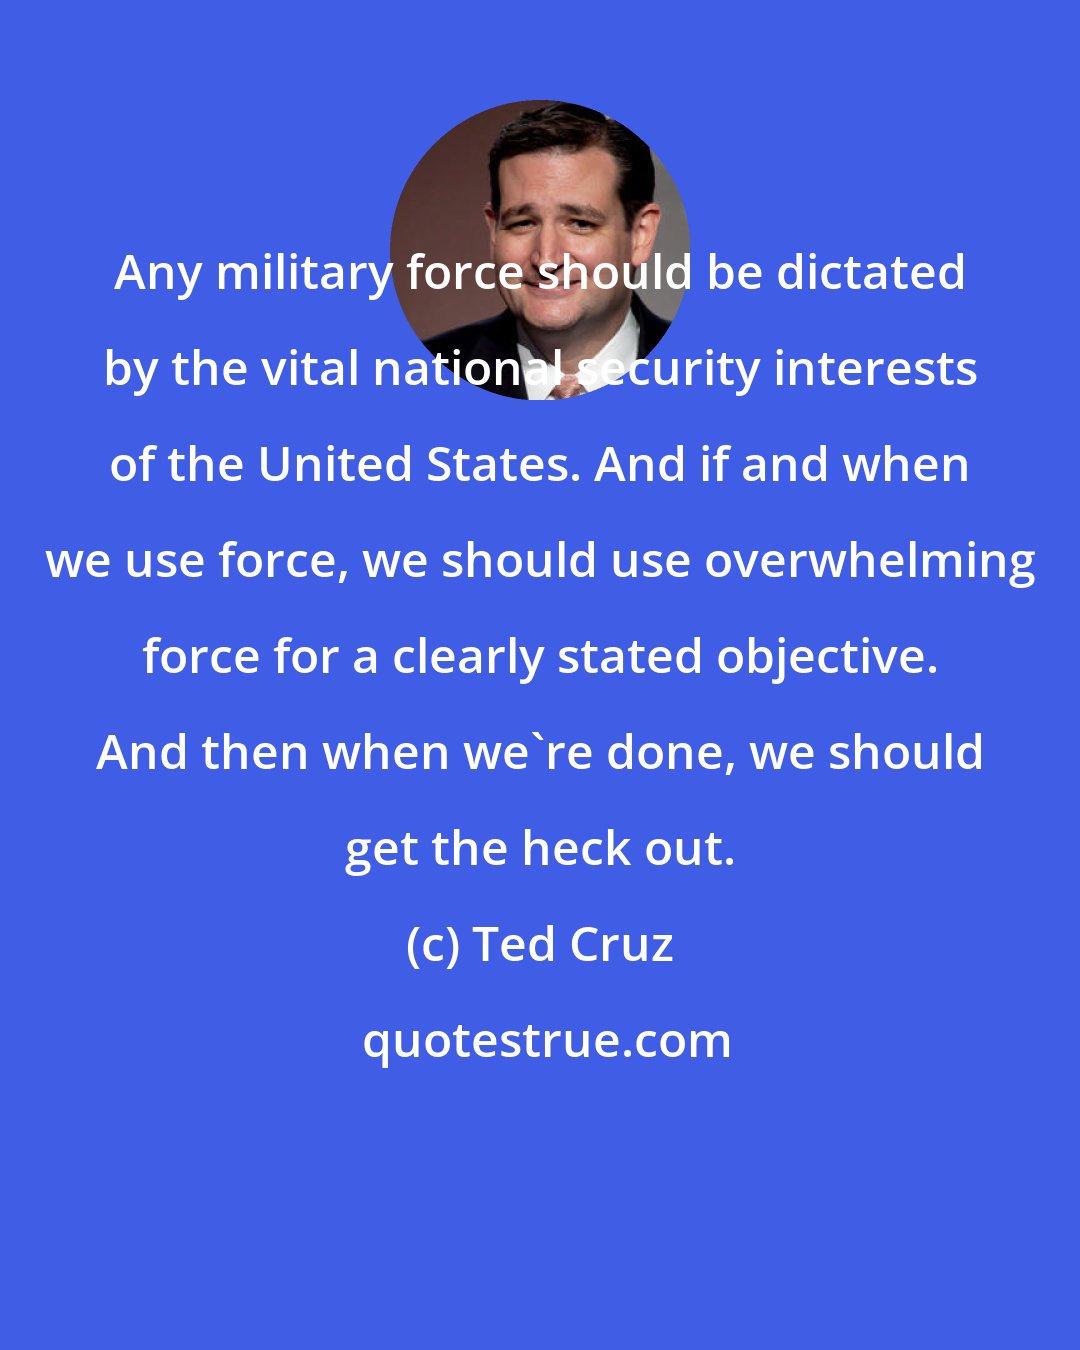 Ted Cruz: Any military force should be dictated by the vital national security interests of the United States. And if and when we use force, we should use overwhelming force for a clearly stated objective. And then when we're done, we should get the heck out.